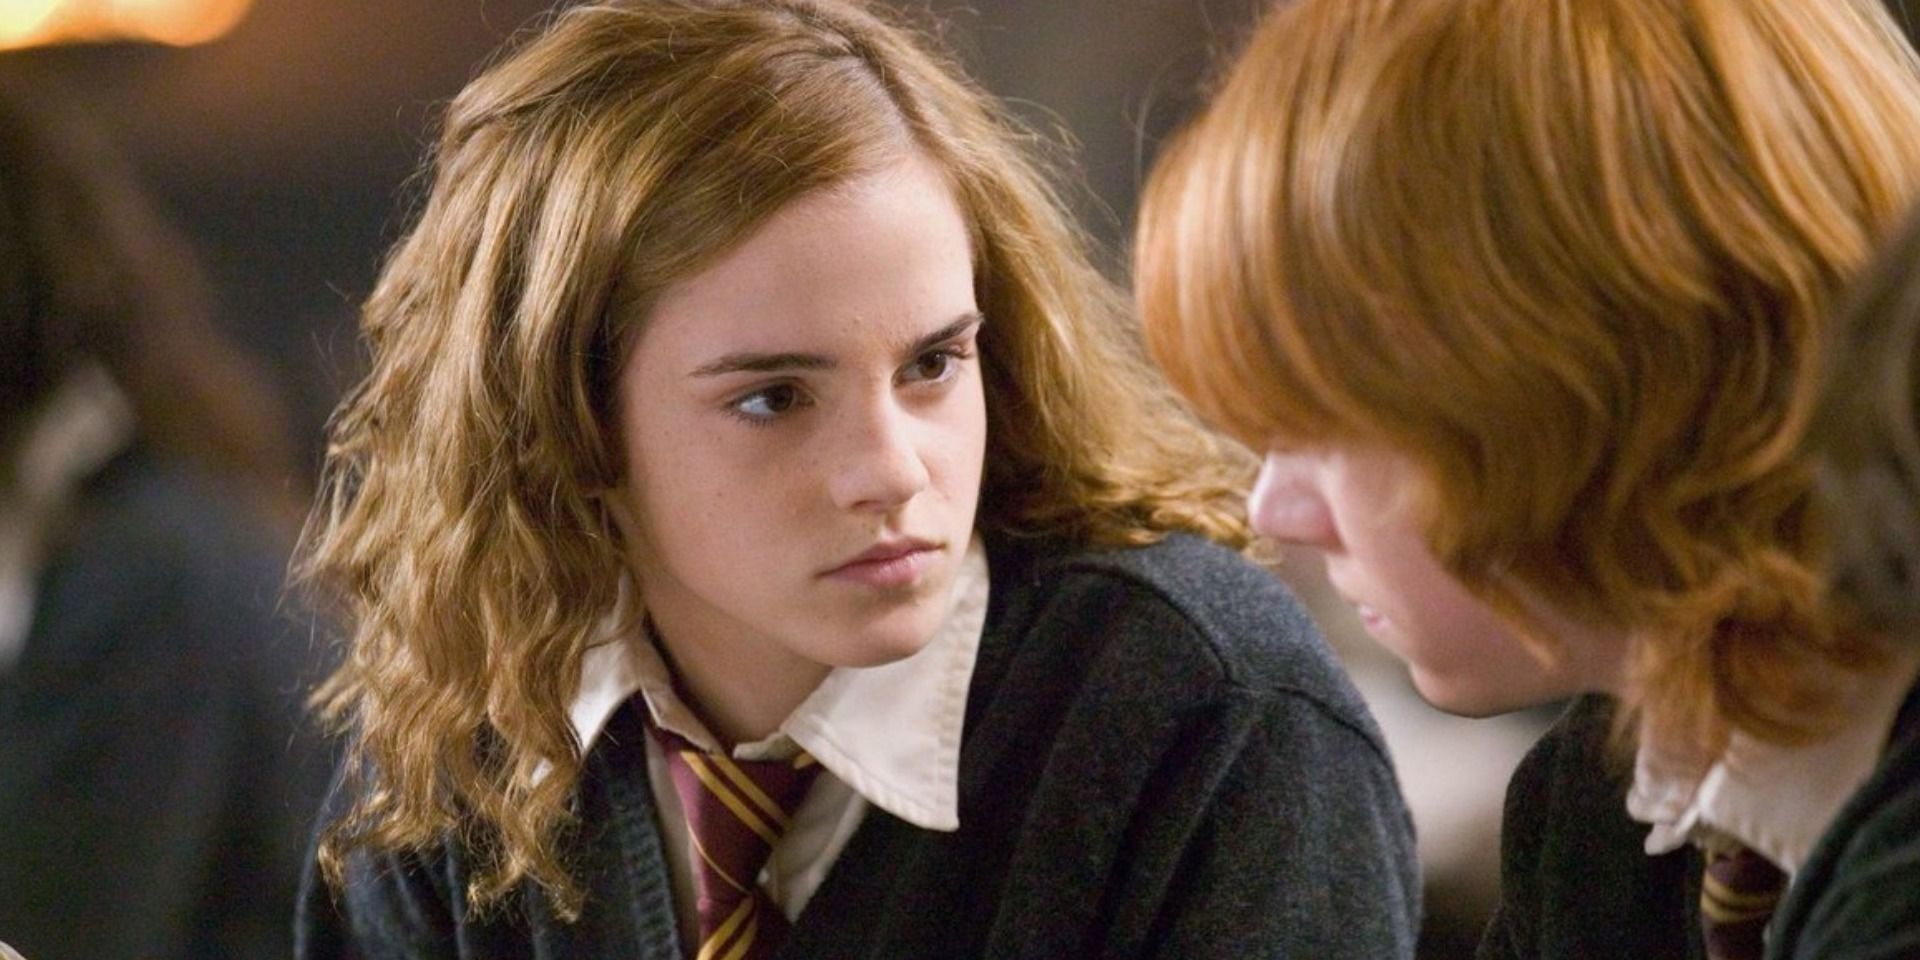 Hermione talking to Ron in Harry Potter &amp; the Goblet of Fire.